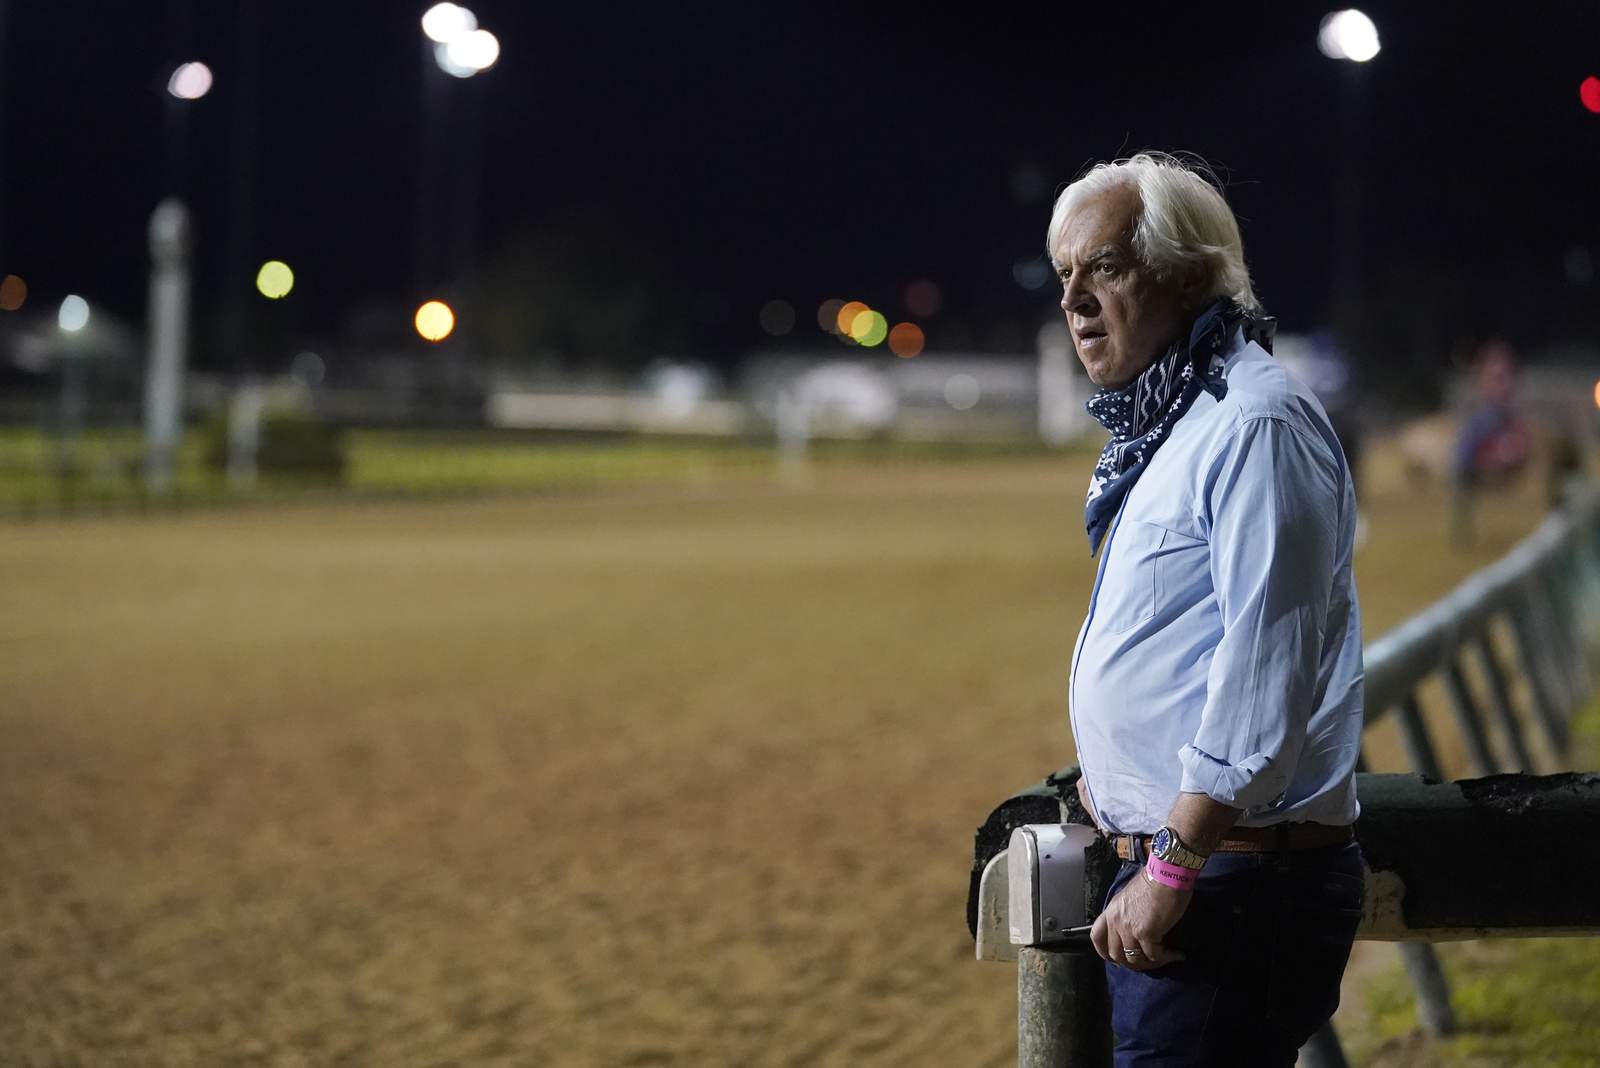 Another horse in Baffert’s stable draws a positive test